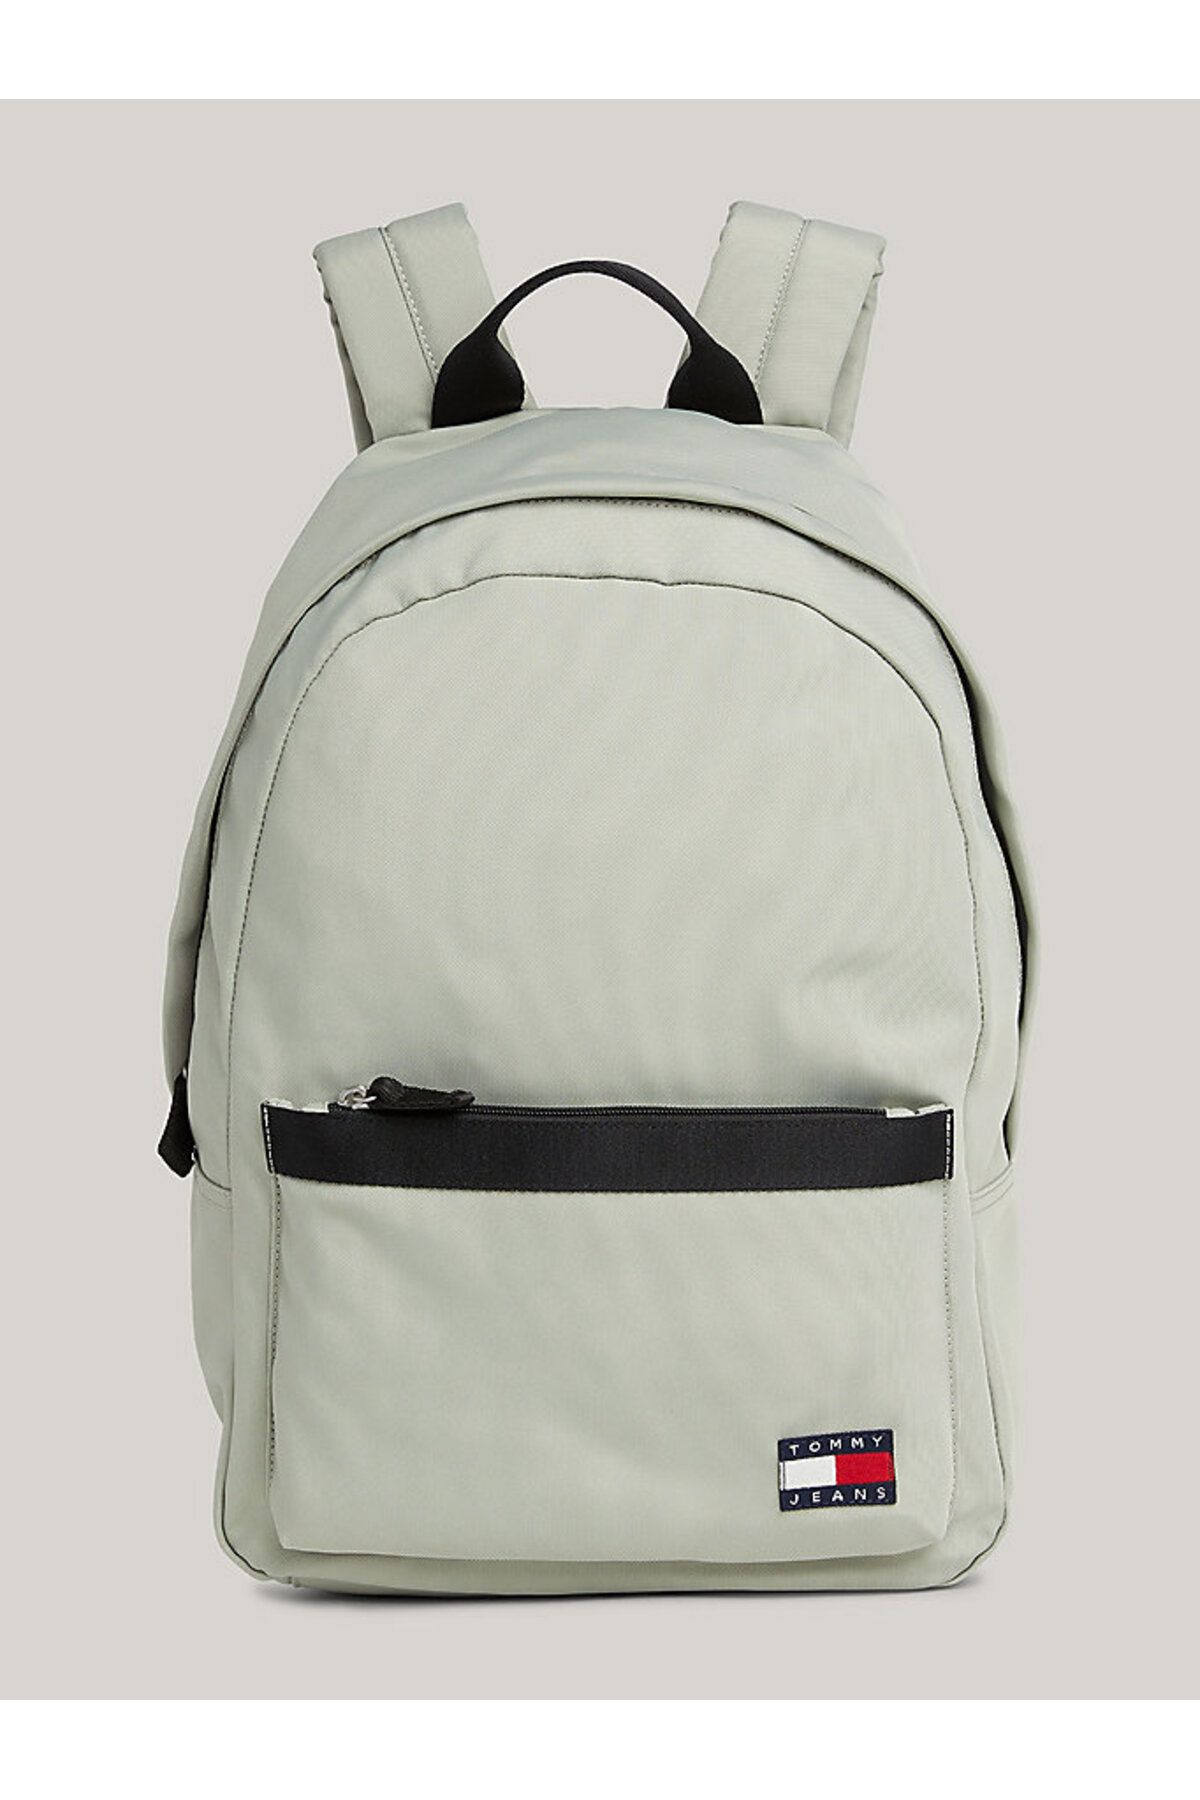 Tommy Hilfiger TJM DAILY DOME BACKPACK